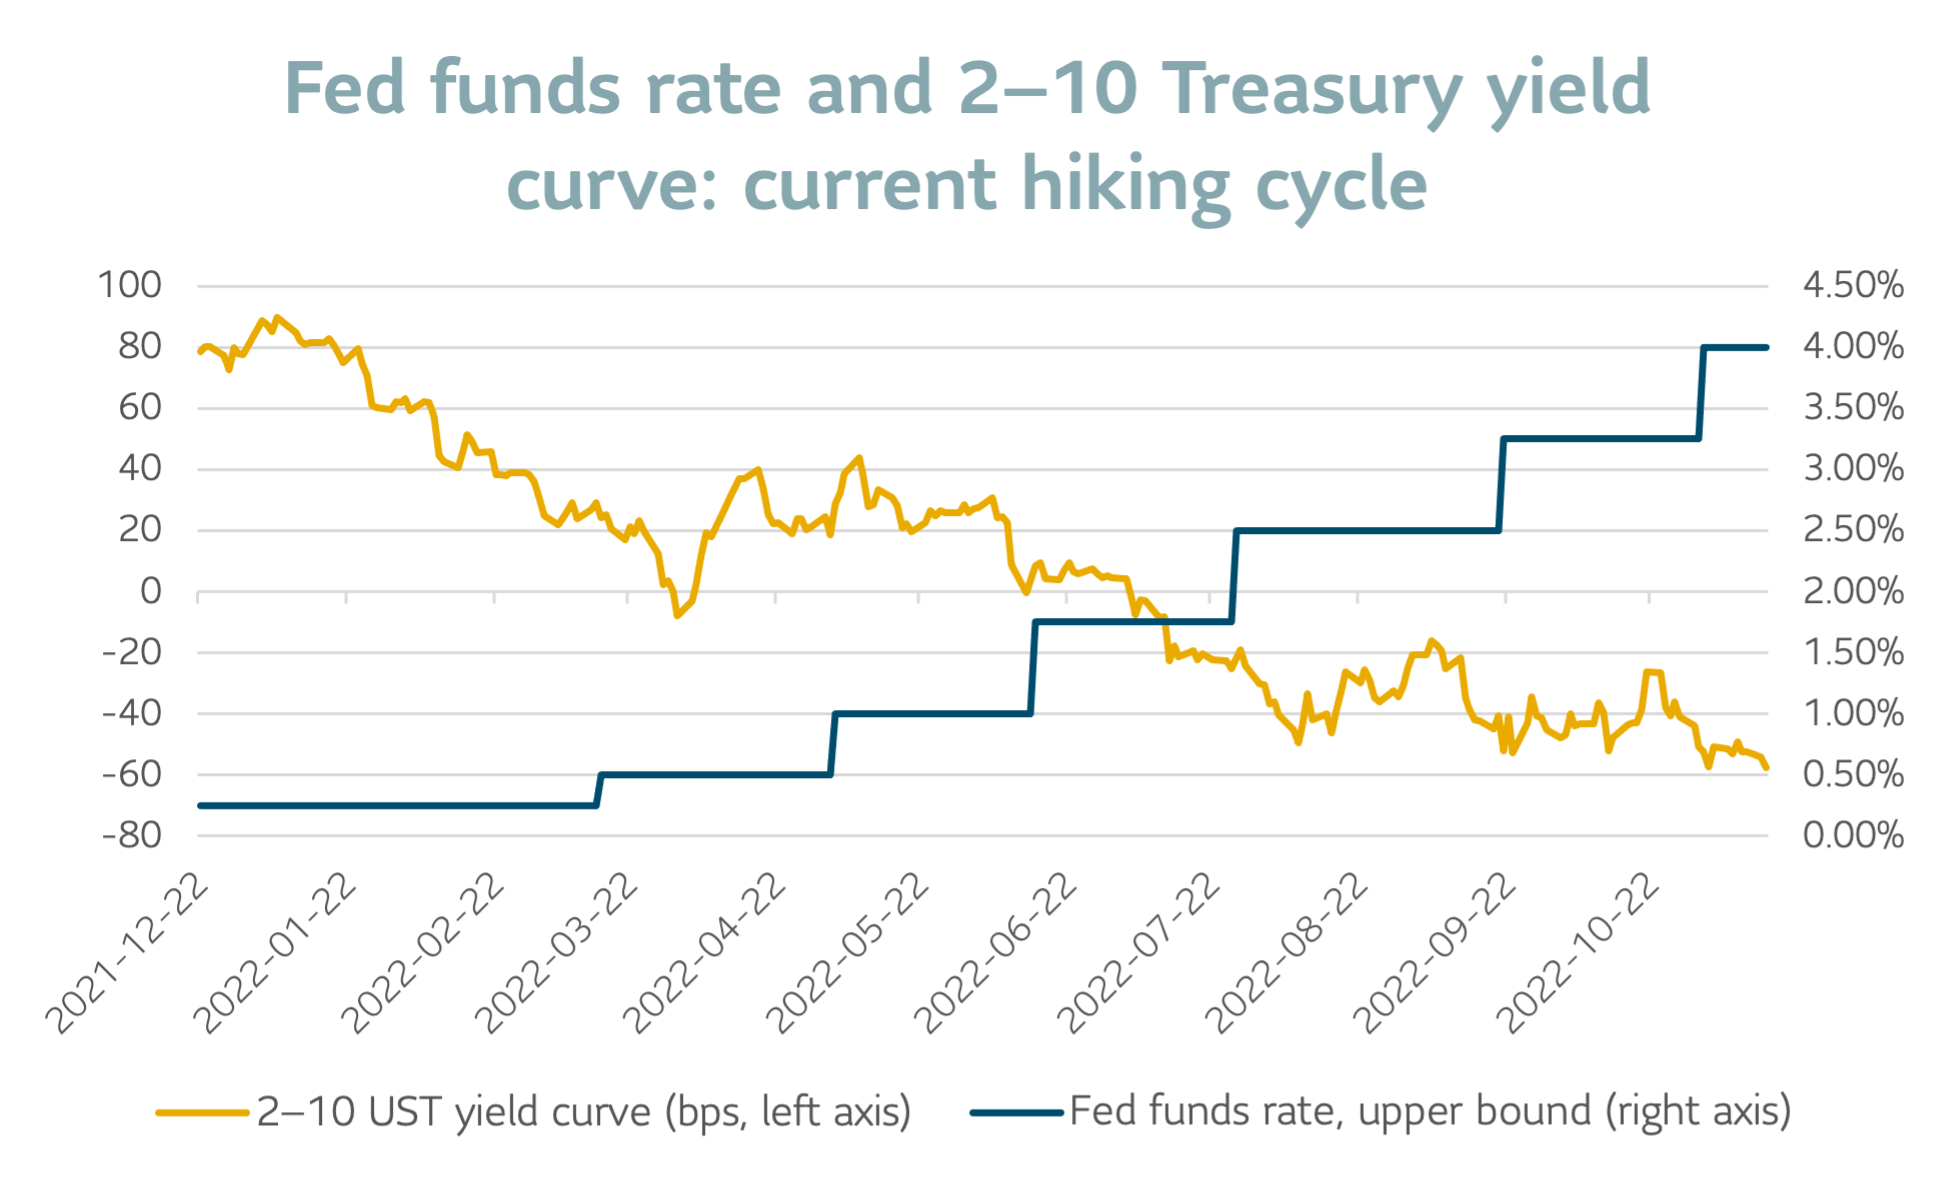 Fed funds rate and 2-10 Treasury yield curve: current hiking cycle